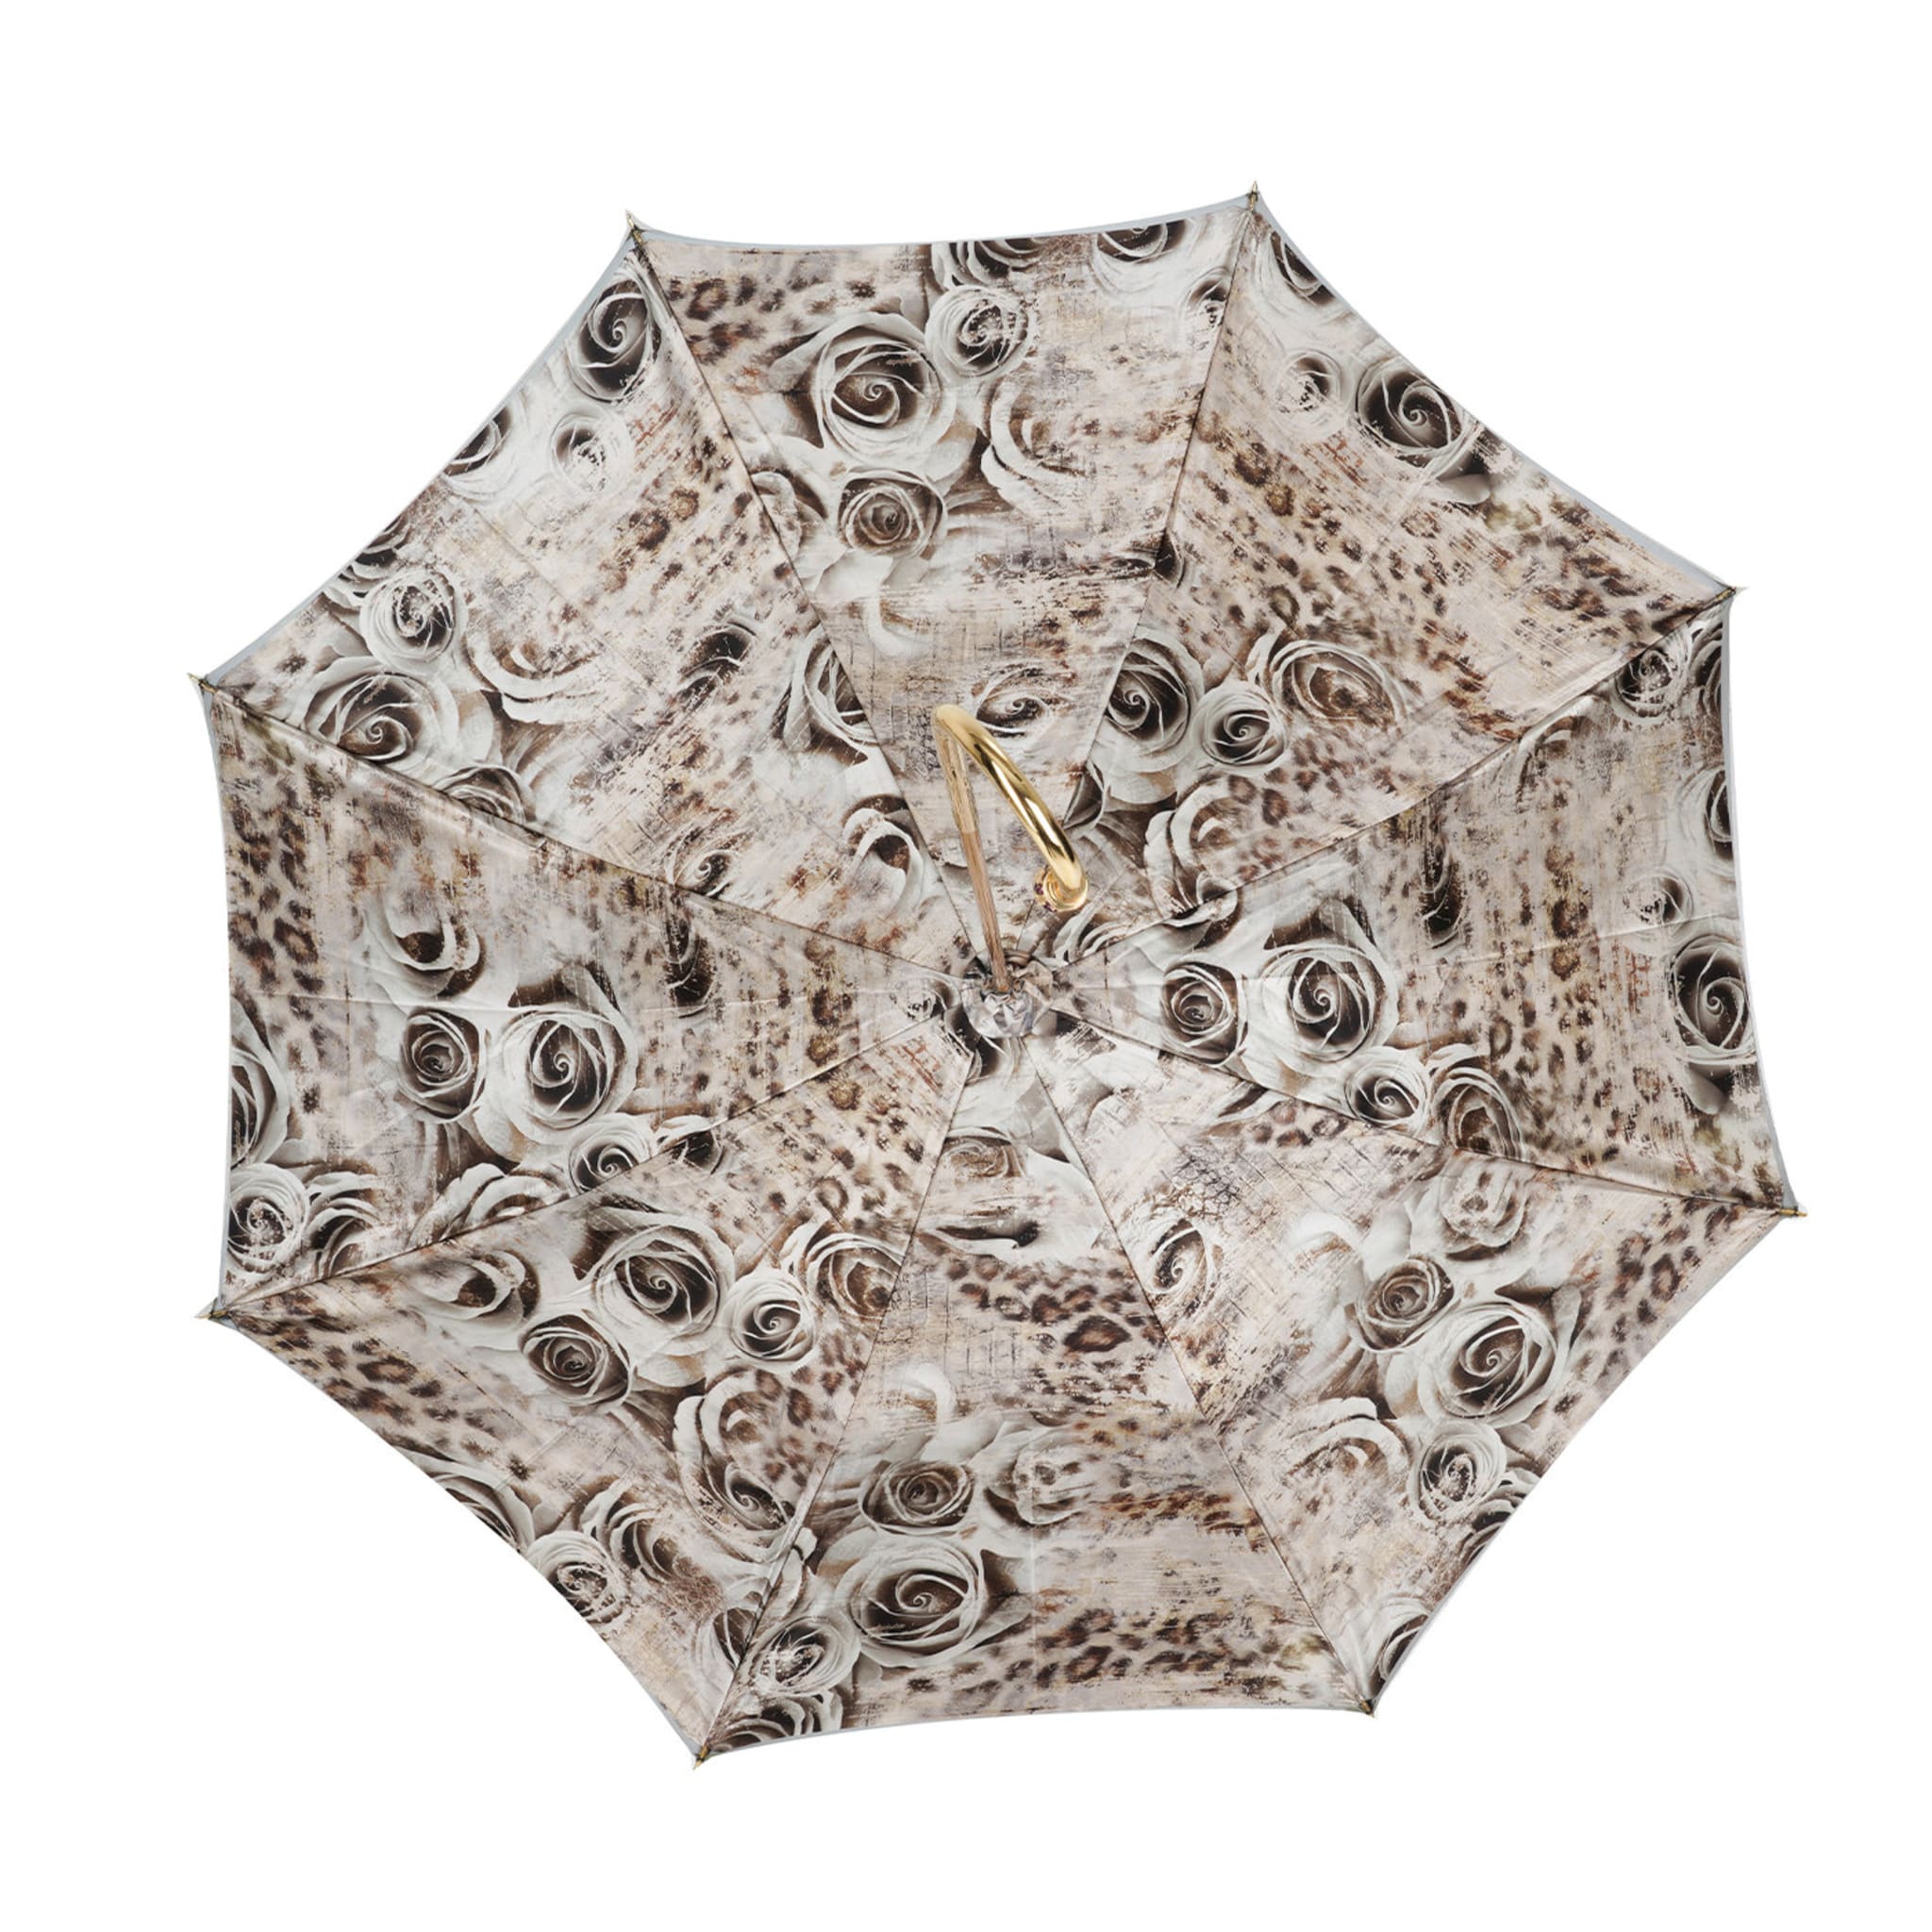 Roses and Leopard-Skin Green Umbrella with Jeweled Handle - Alternative view 2